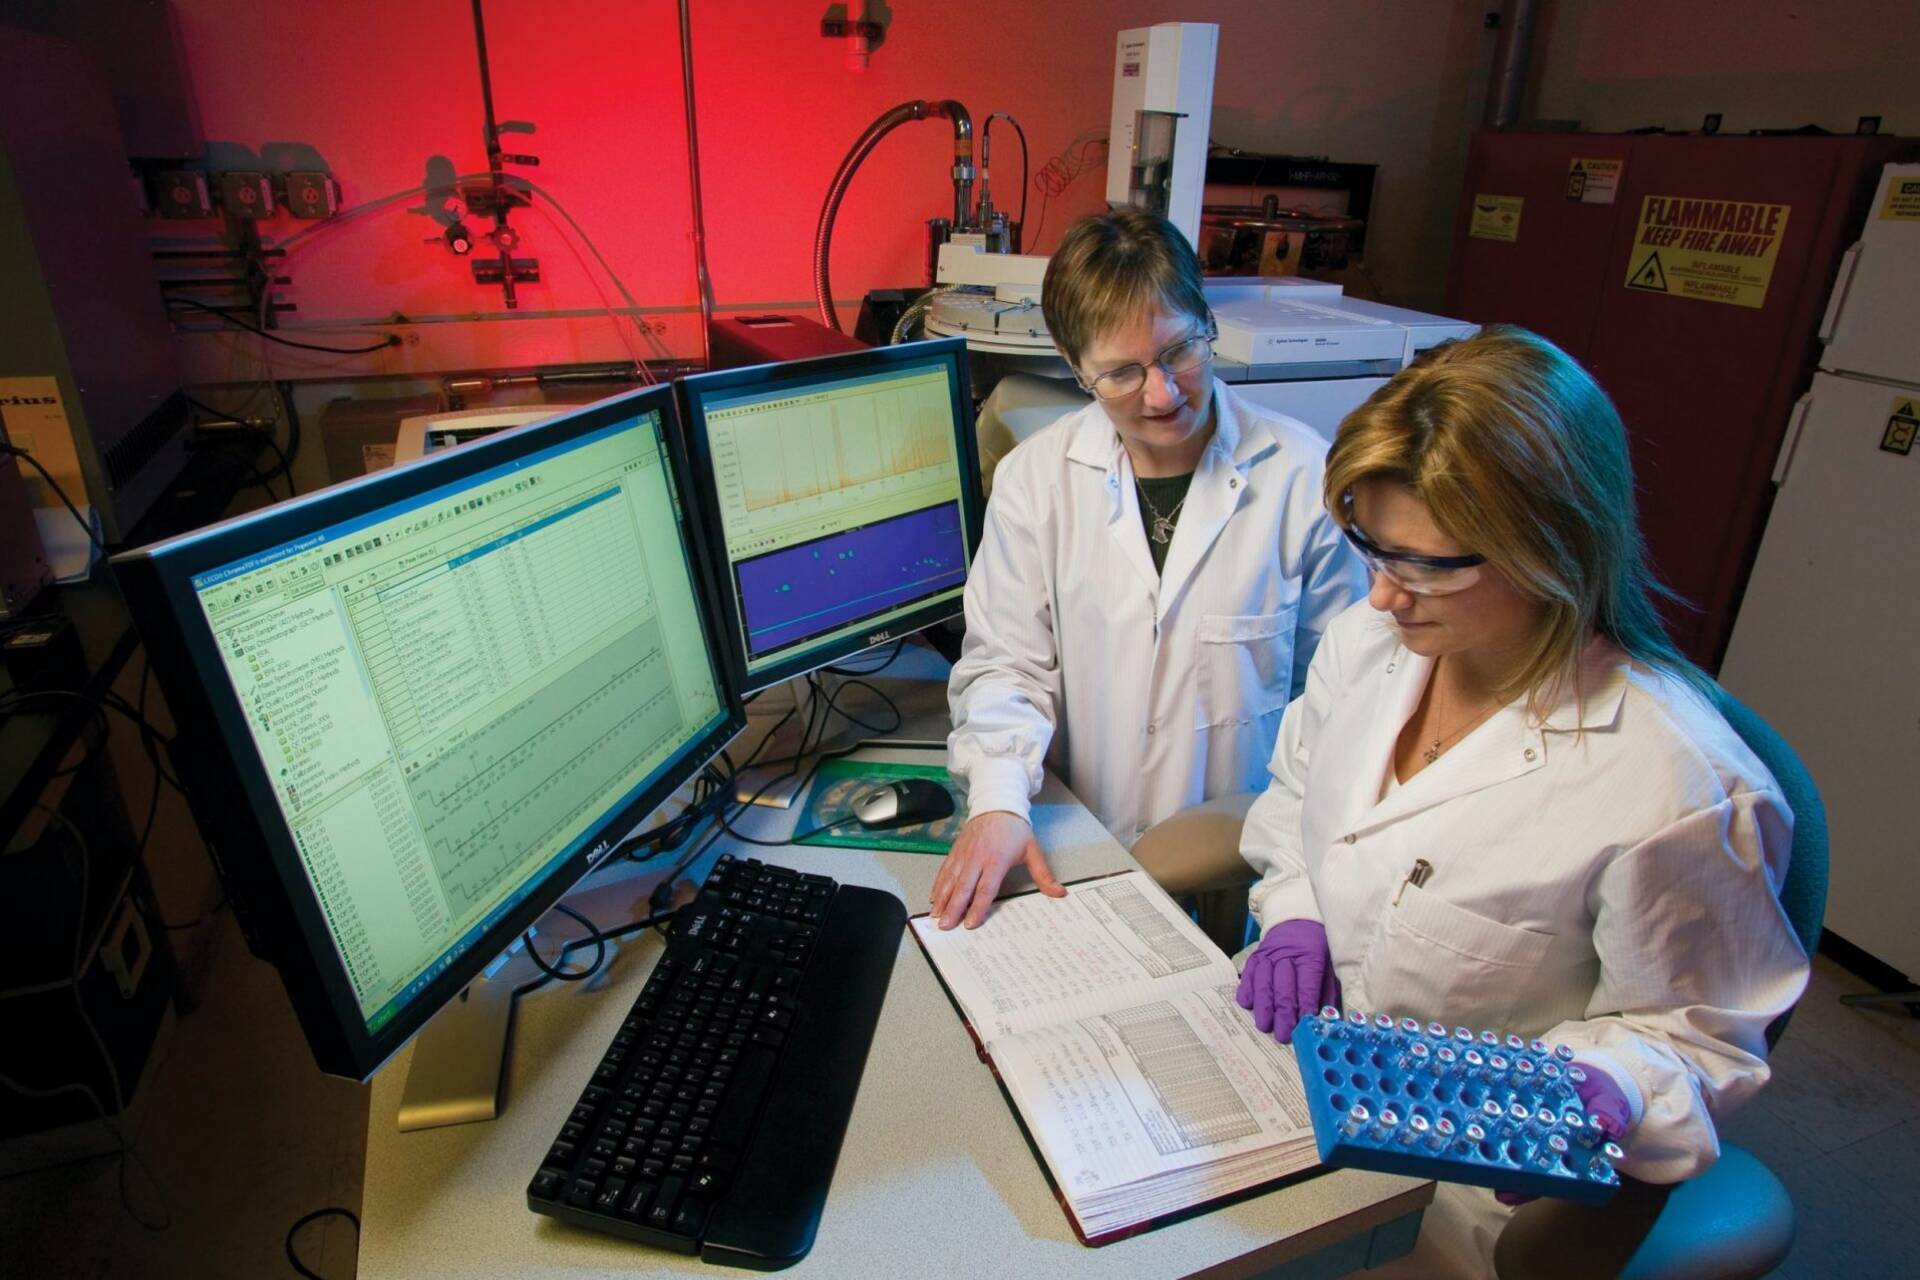 Two ladies in lab coats analysing data on a screen